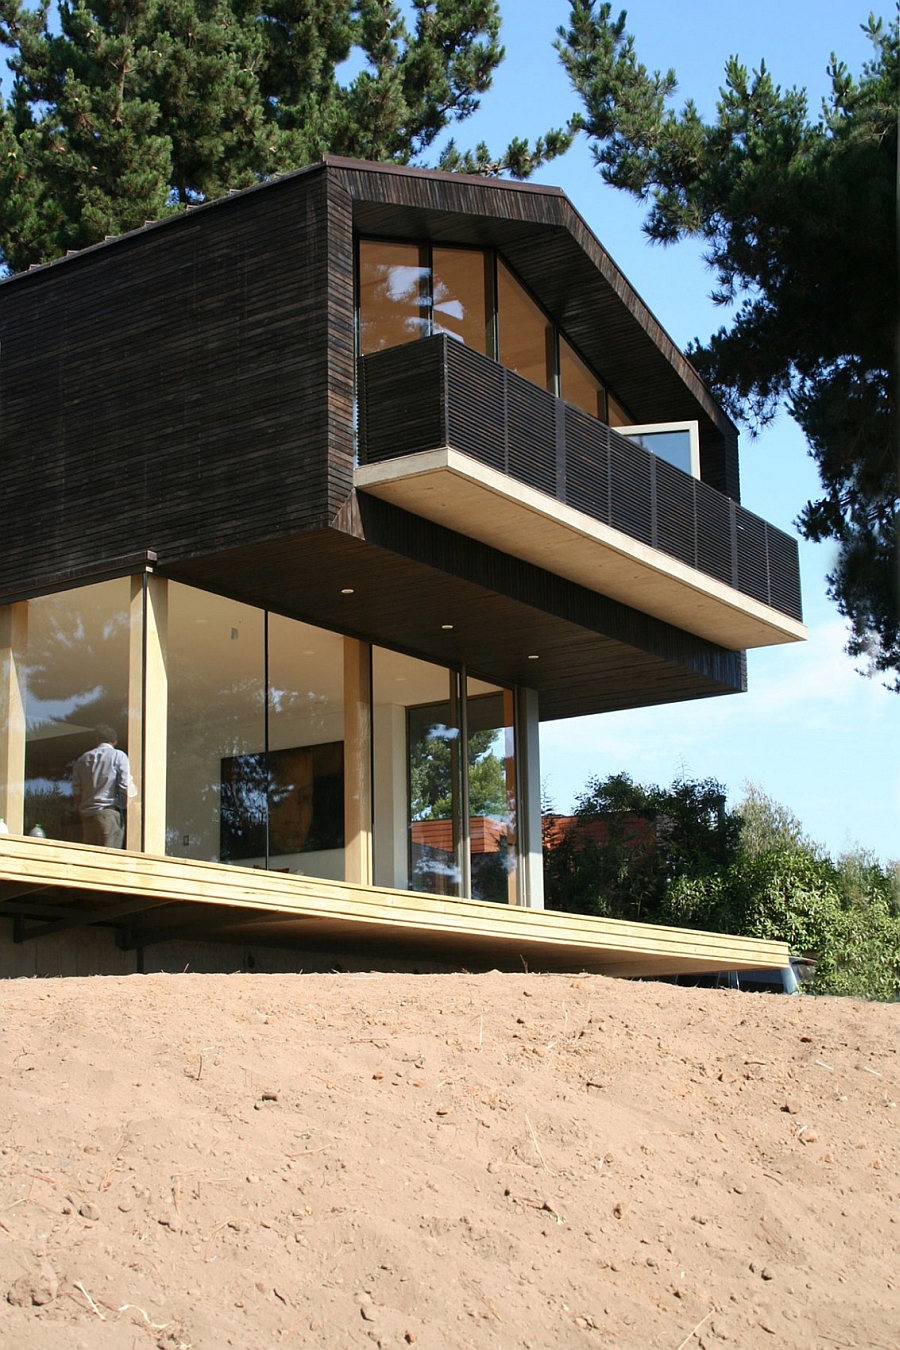 Exterior clad in glass and wood